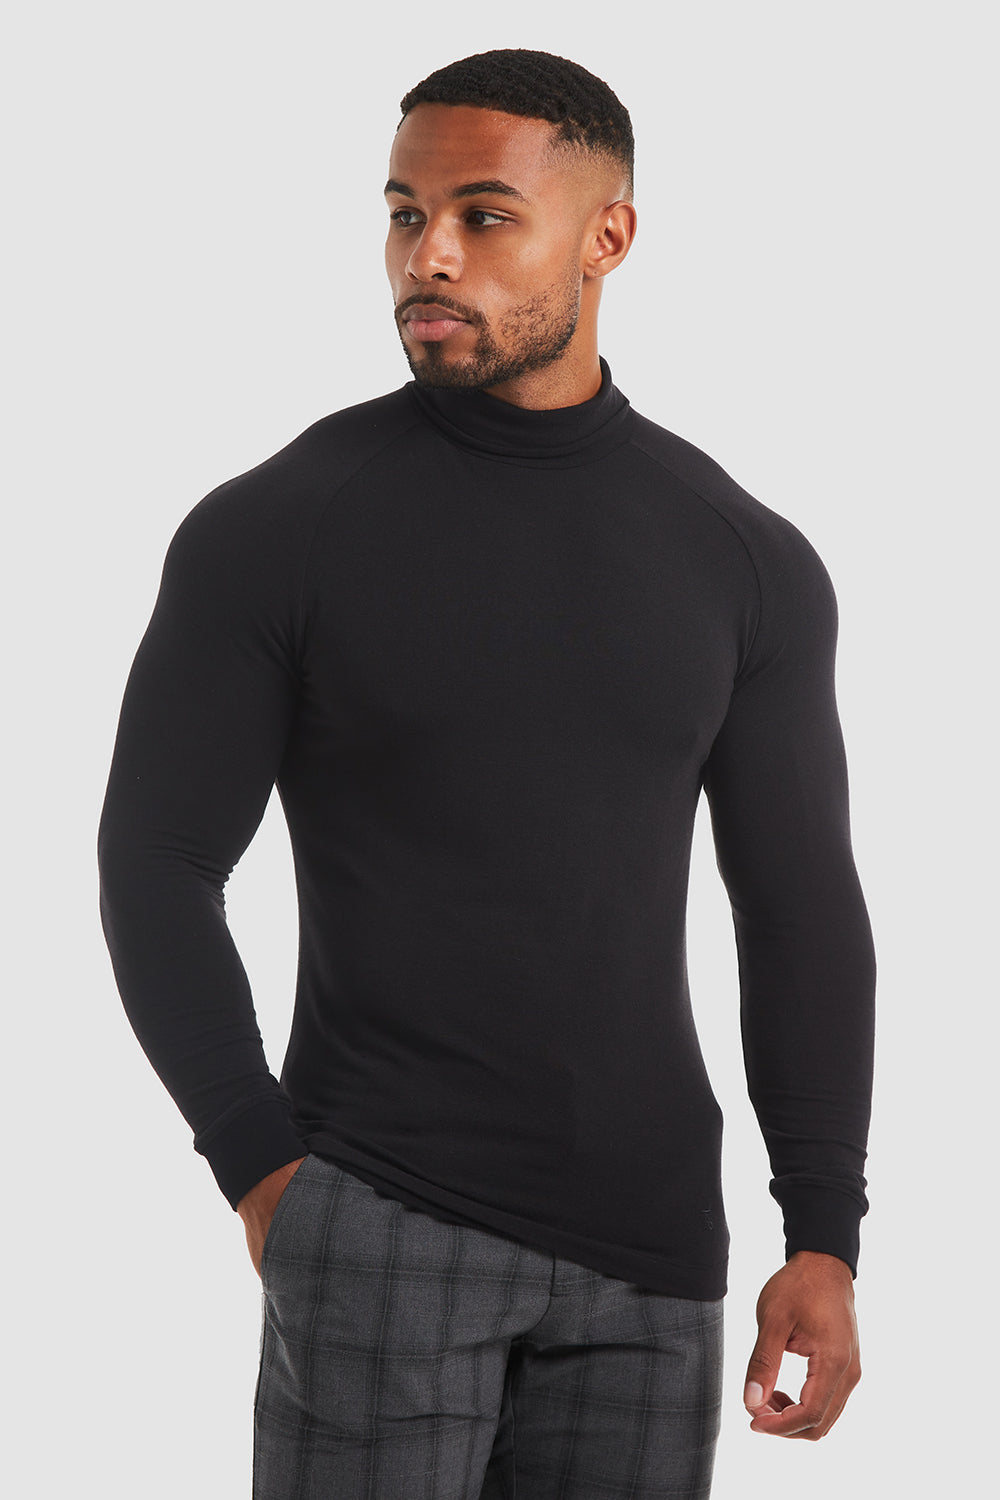 Neck Look Jersey ATHLETE TAILORED in Knit Black USA - Roll - (LS)